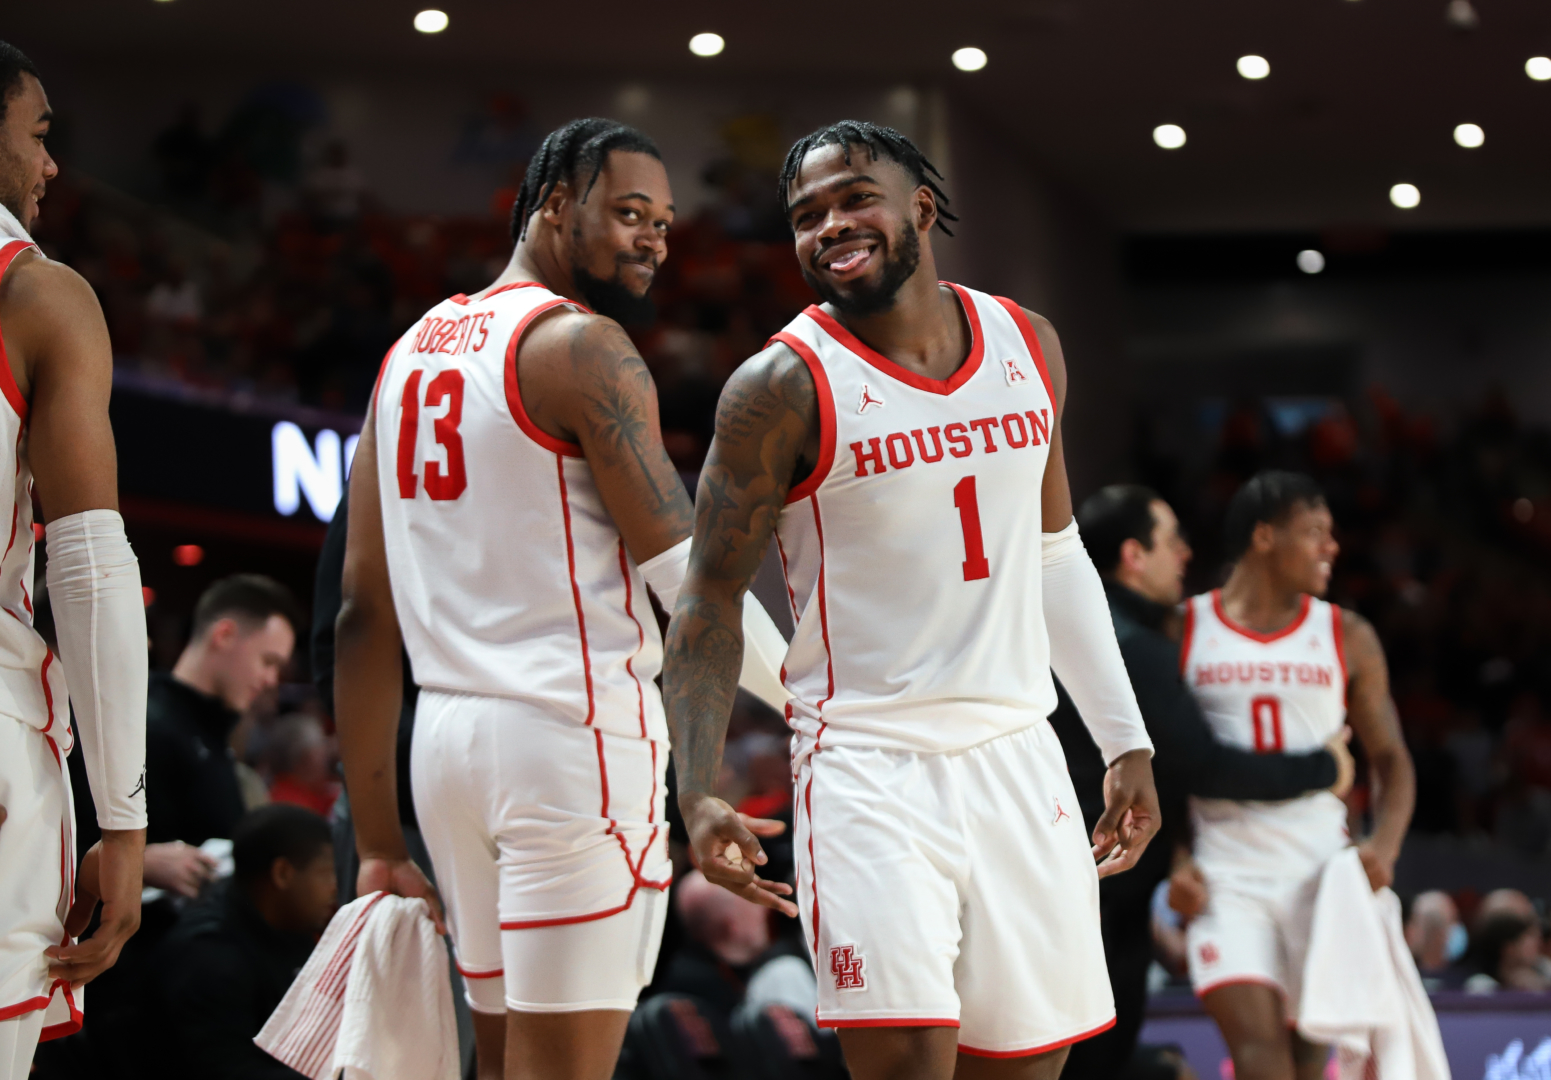 Riding a seven-game win streak, UH basketball is back at No. 1 in the AP poll. | Anh Le/The Cougar